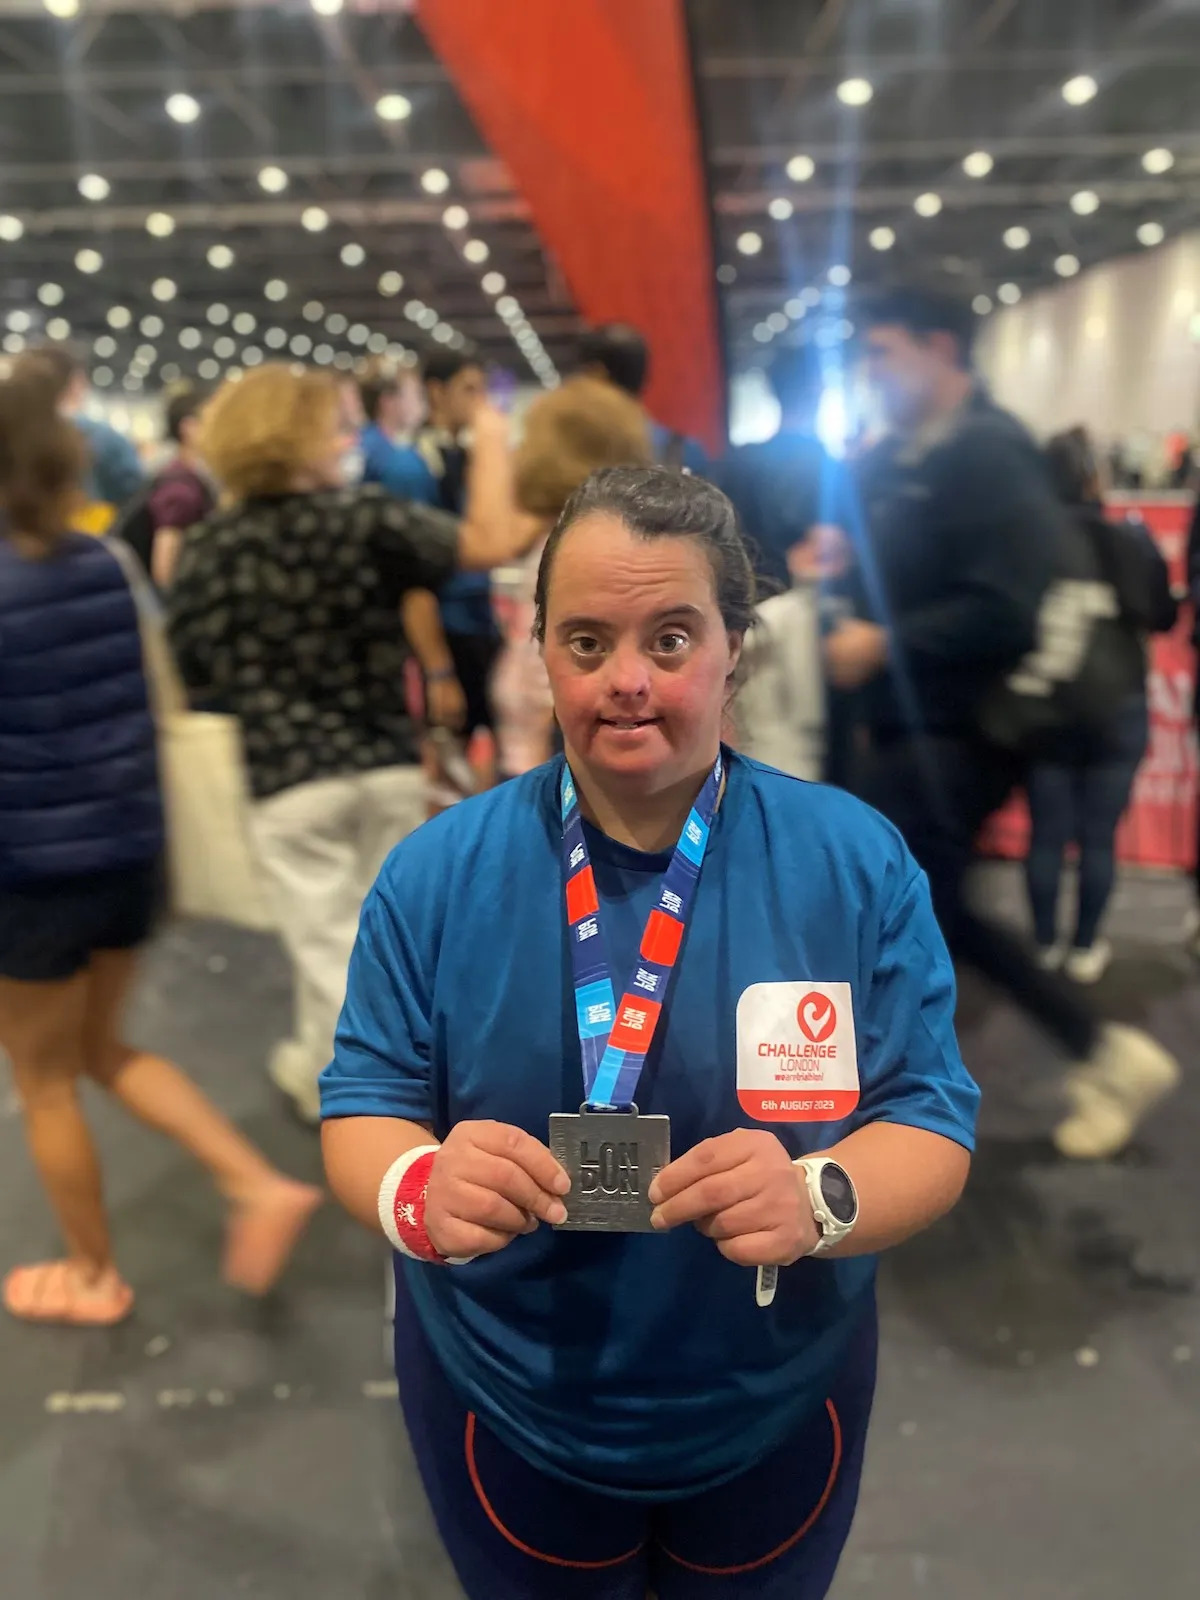 Jade Kingdom with her finisher's medal from Challenge London 2023